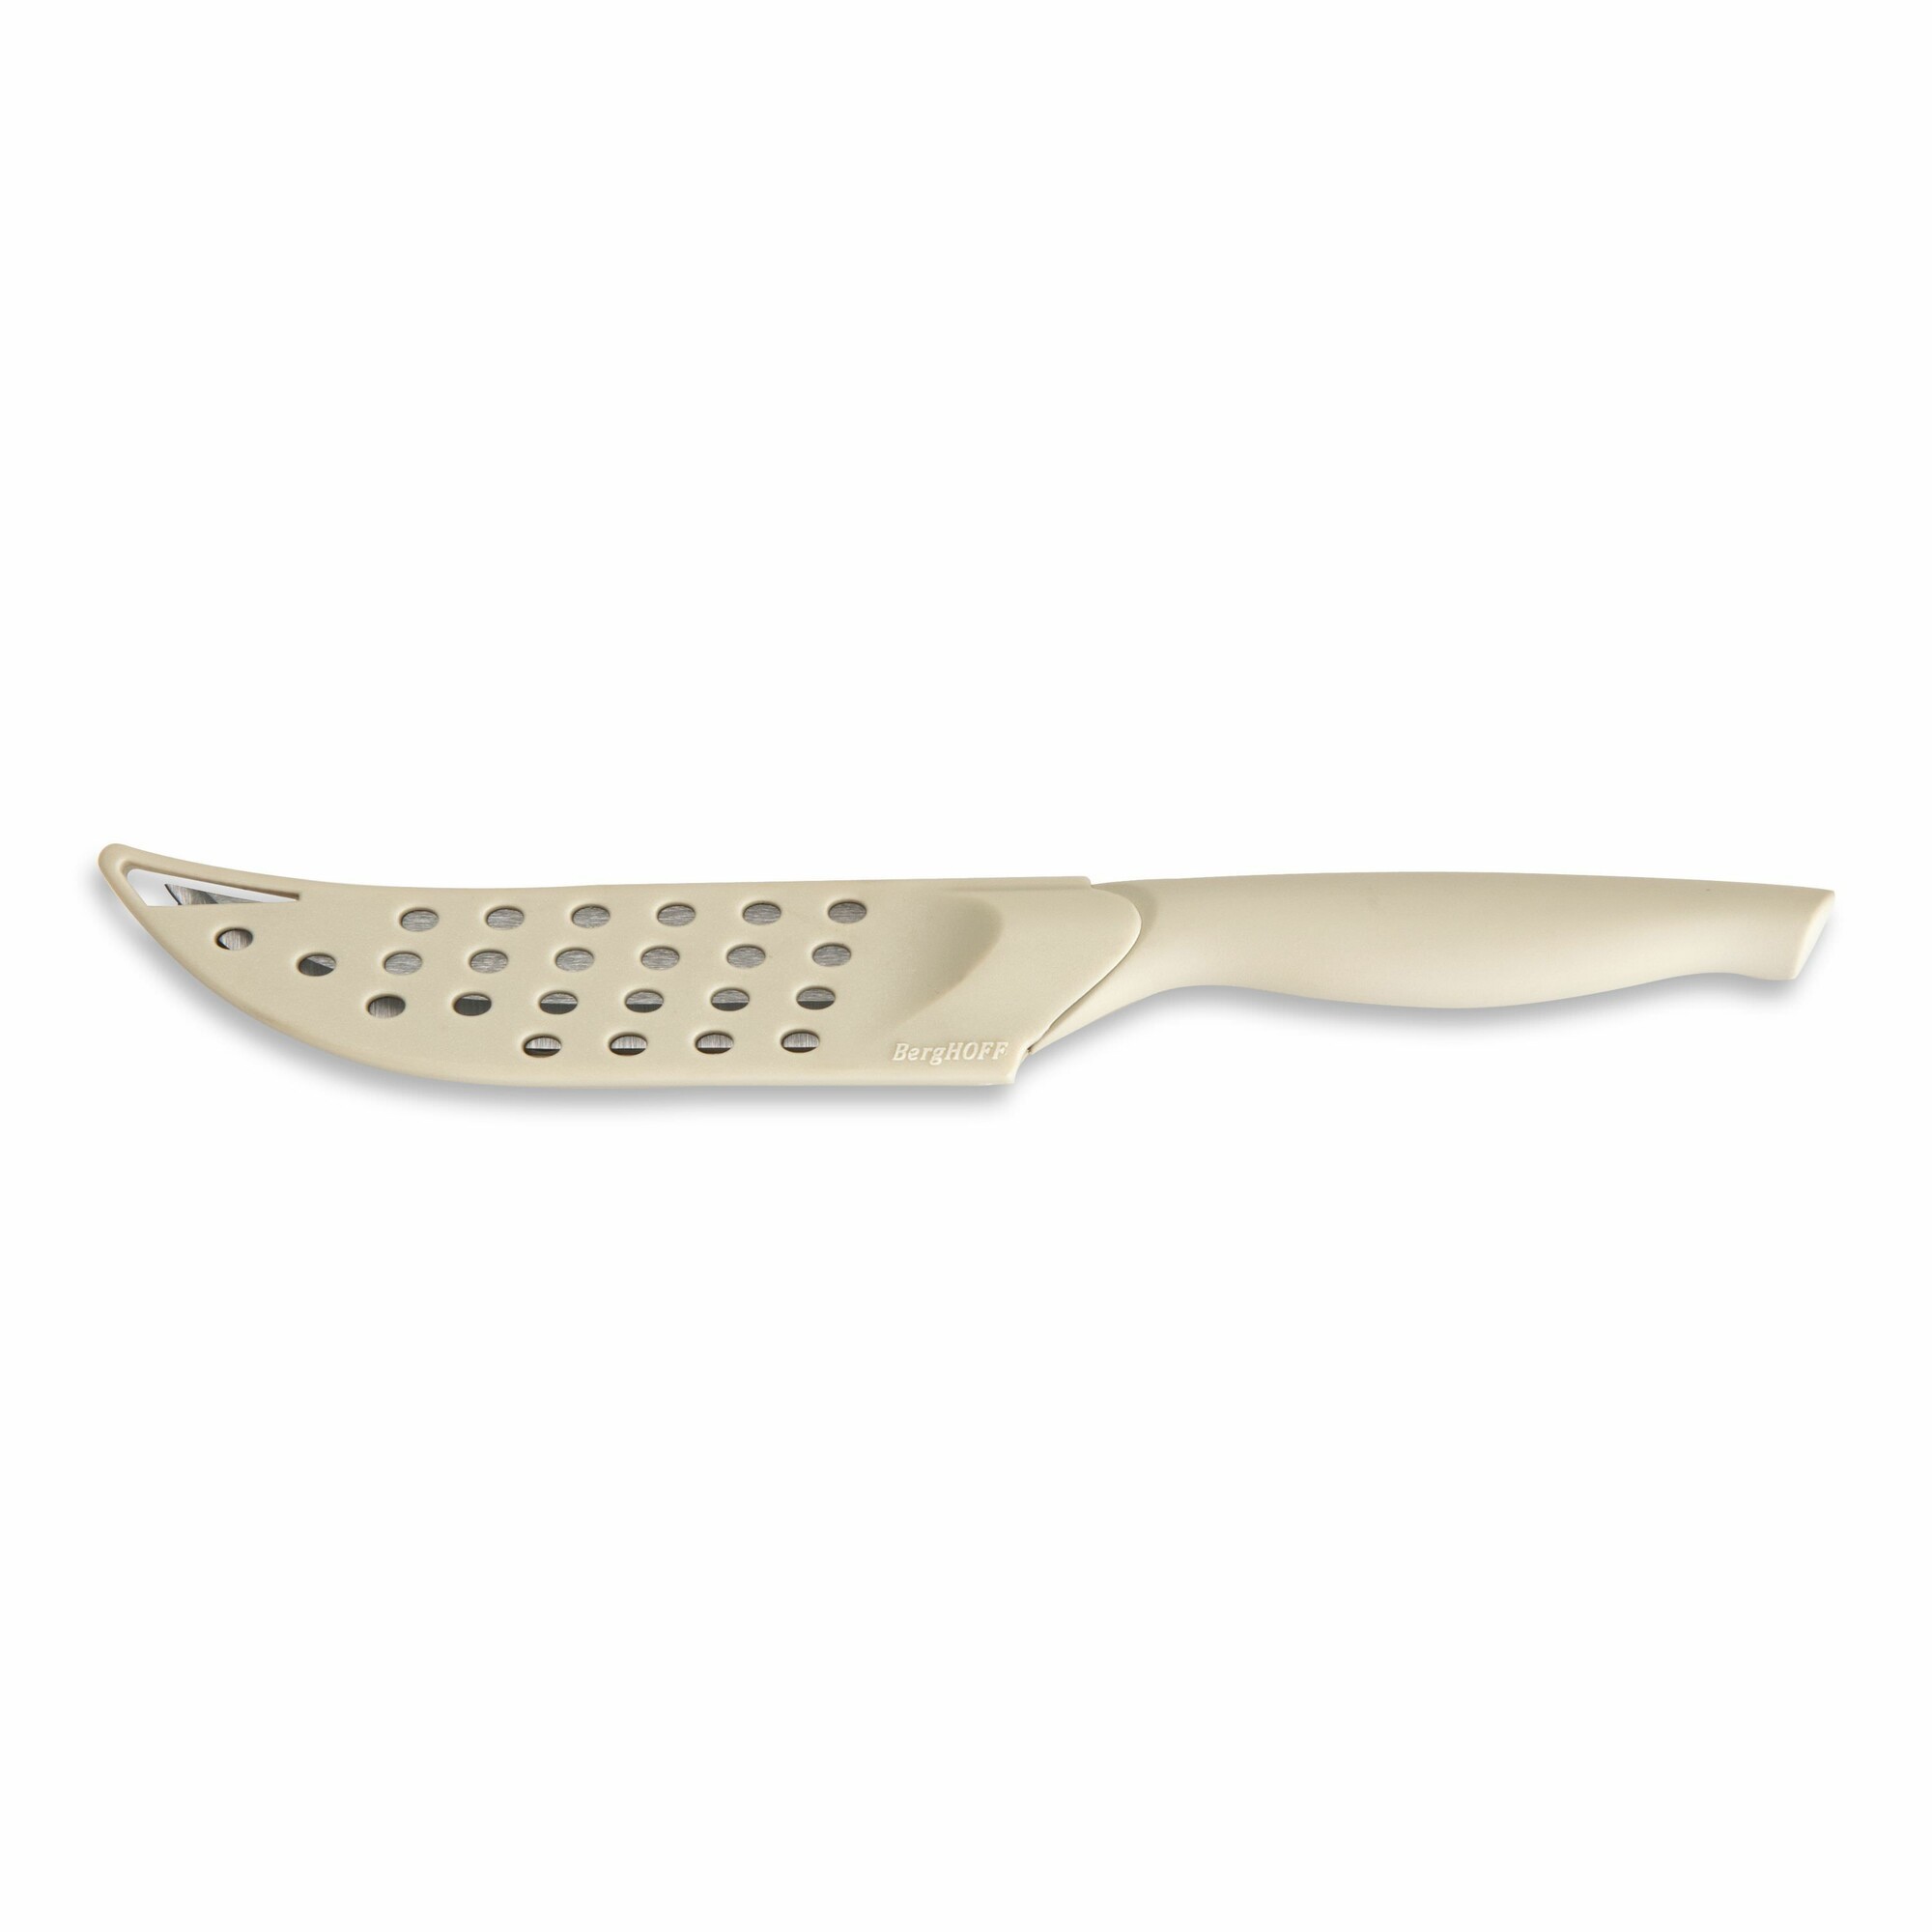 circuit Juggling I'm hungry Ceramic tomato knife 12 cm | Official BergHOFF Outlet